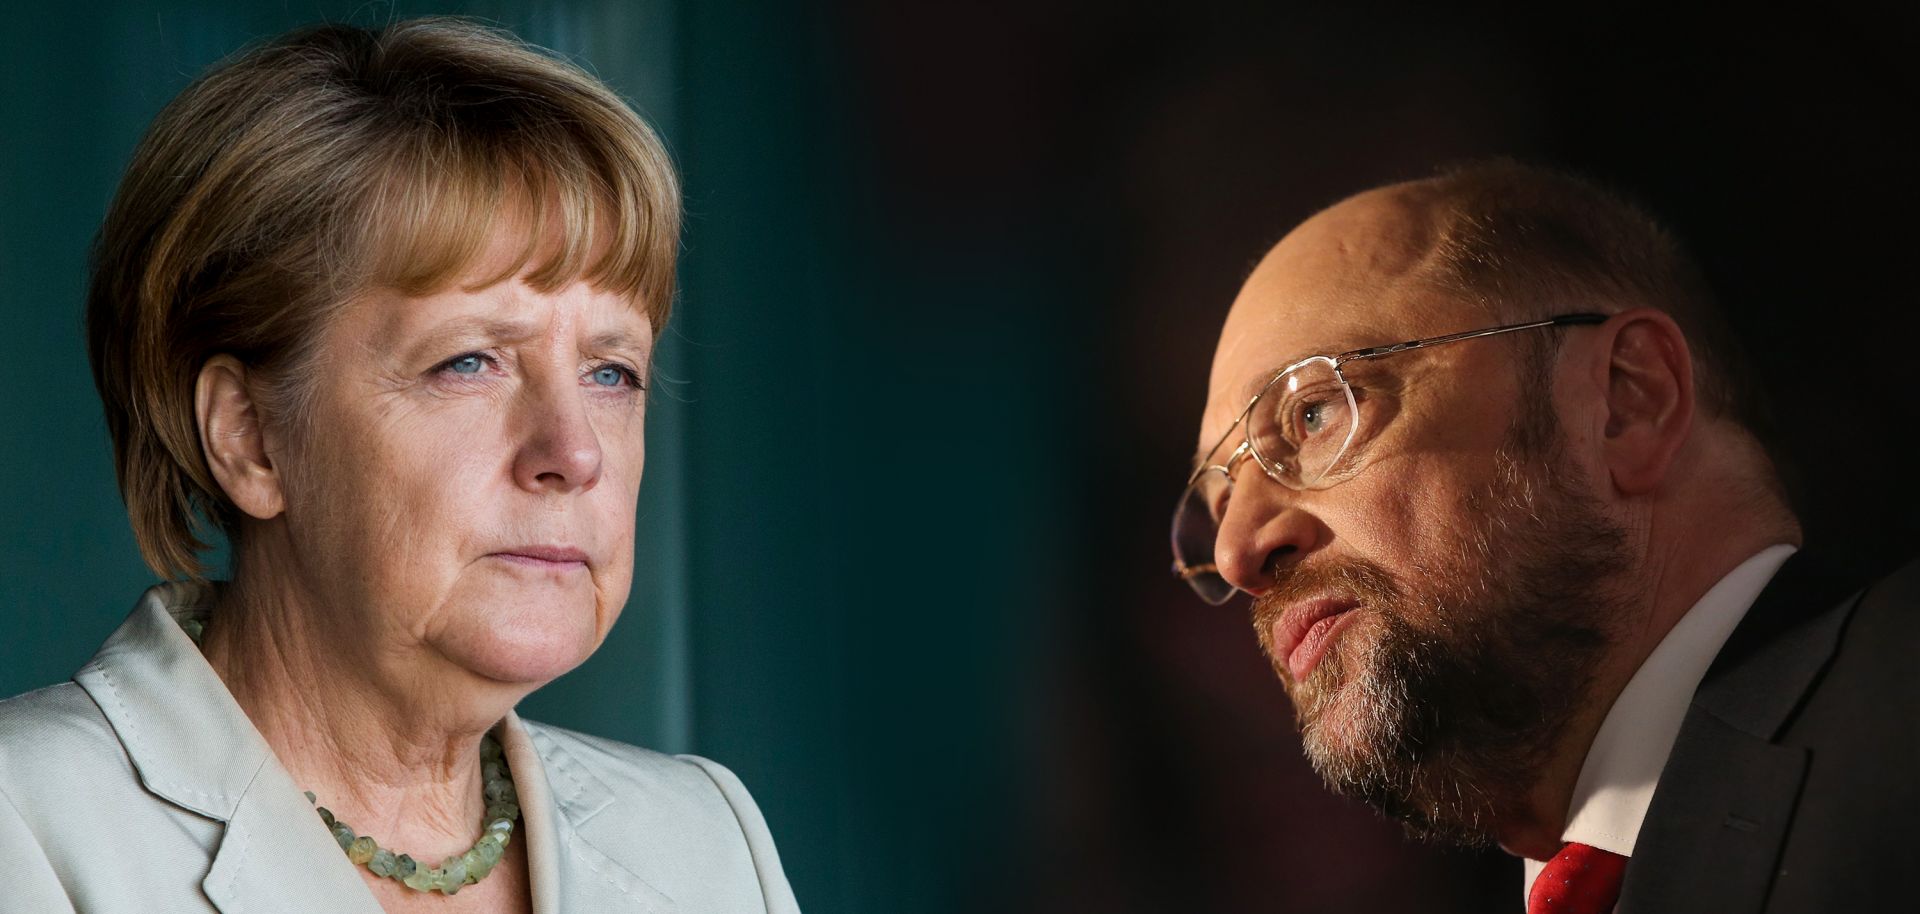 For the past four years, Germany has been governed by a ruling coalition made up of the country's two largest parties: the conservative Christian Democratic Union (CDU), led by Chancellor Angela Merkel, and the progressive Social Democratic Party (SPD), led by former EU Parliament president Martin Schulz